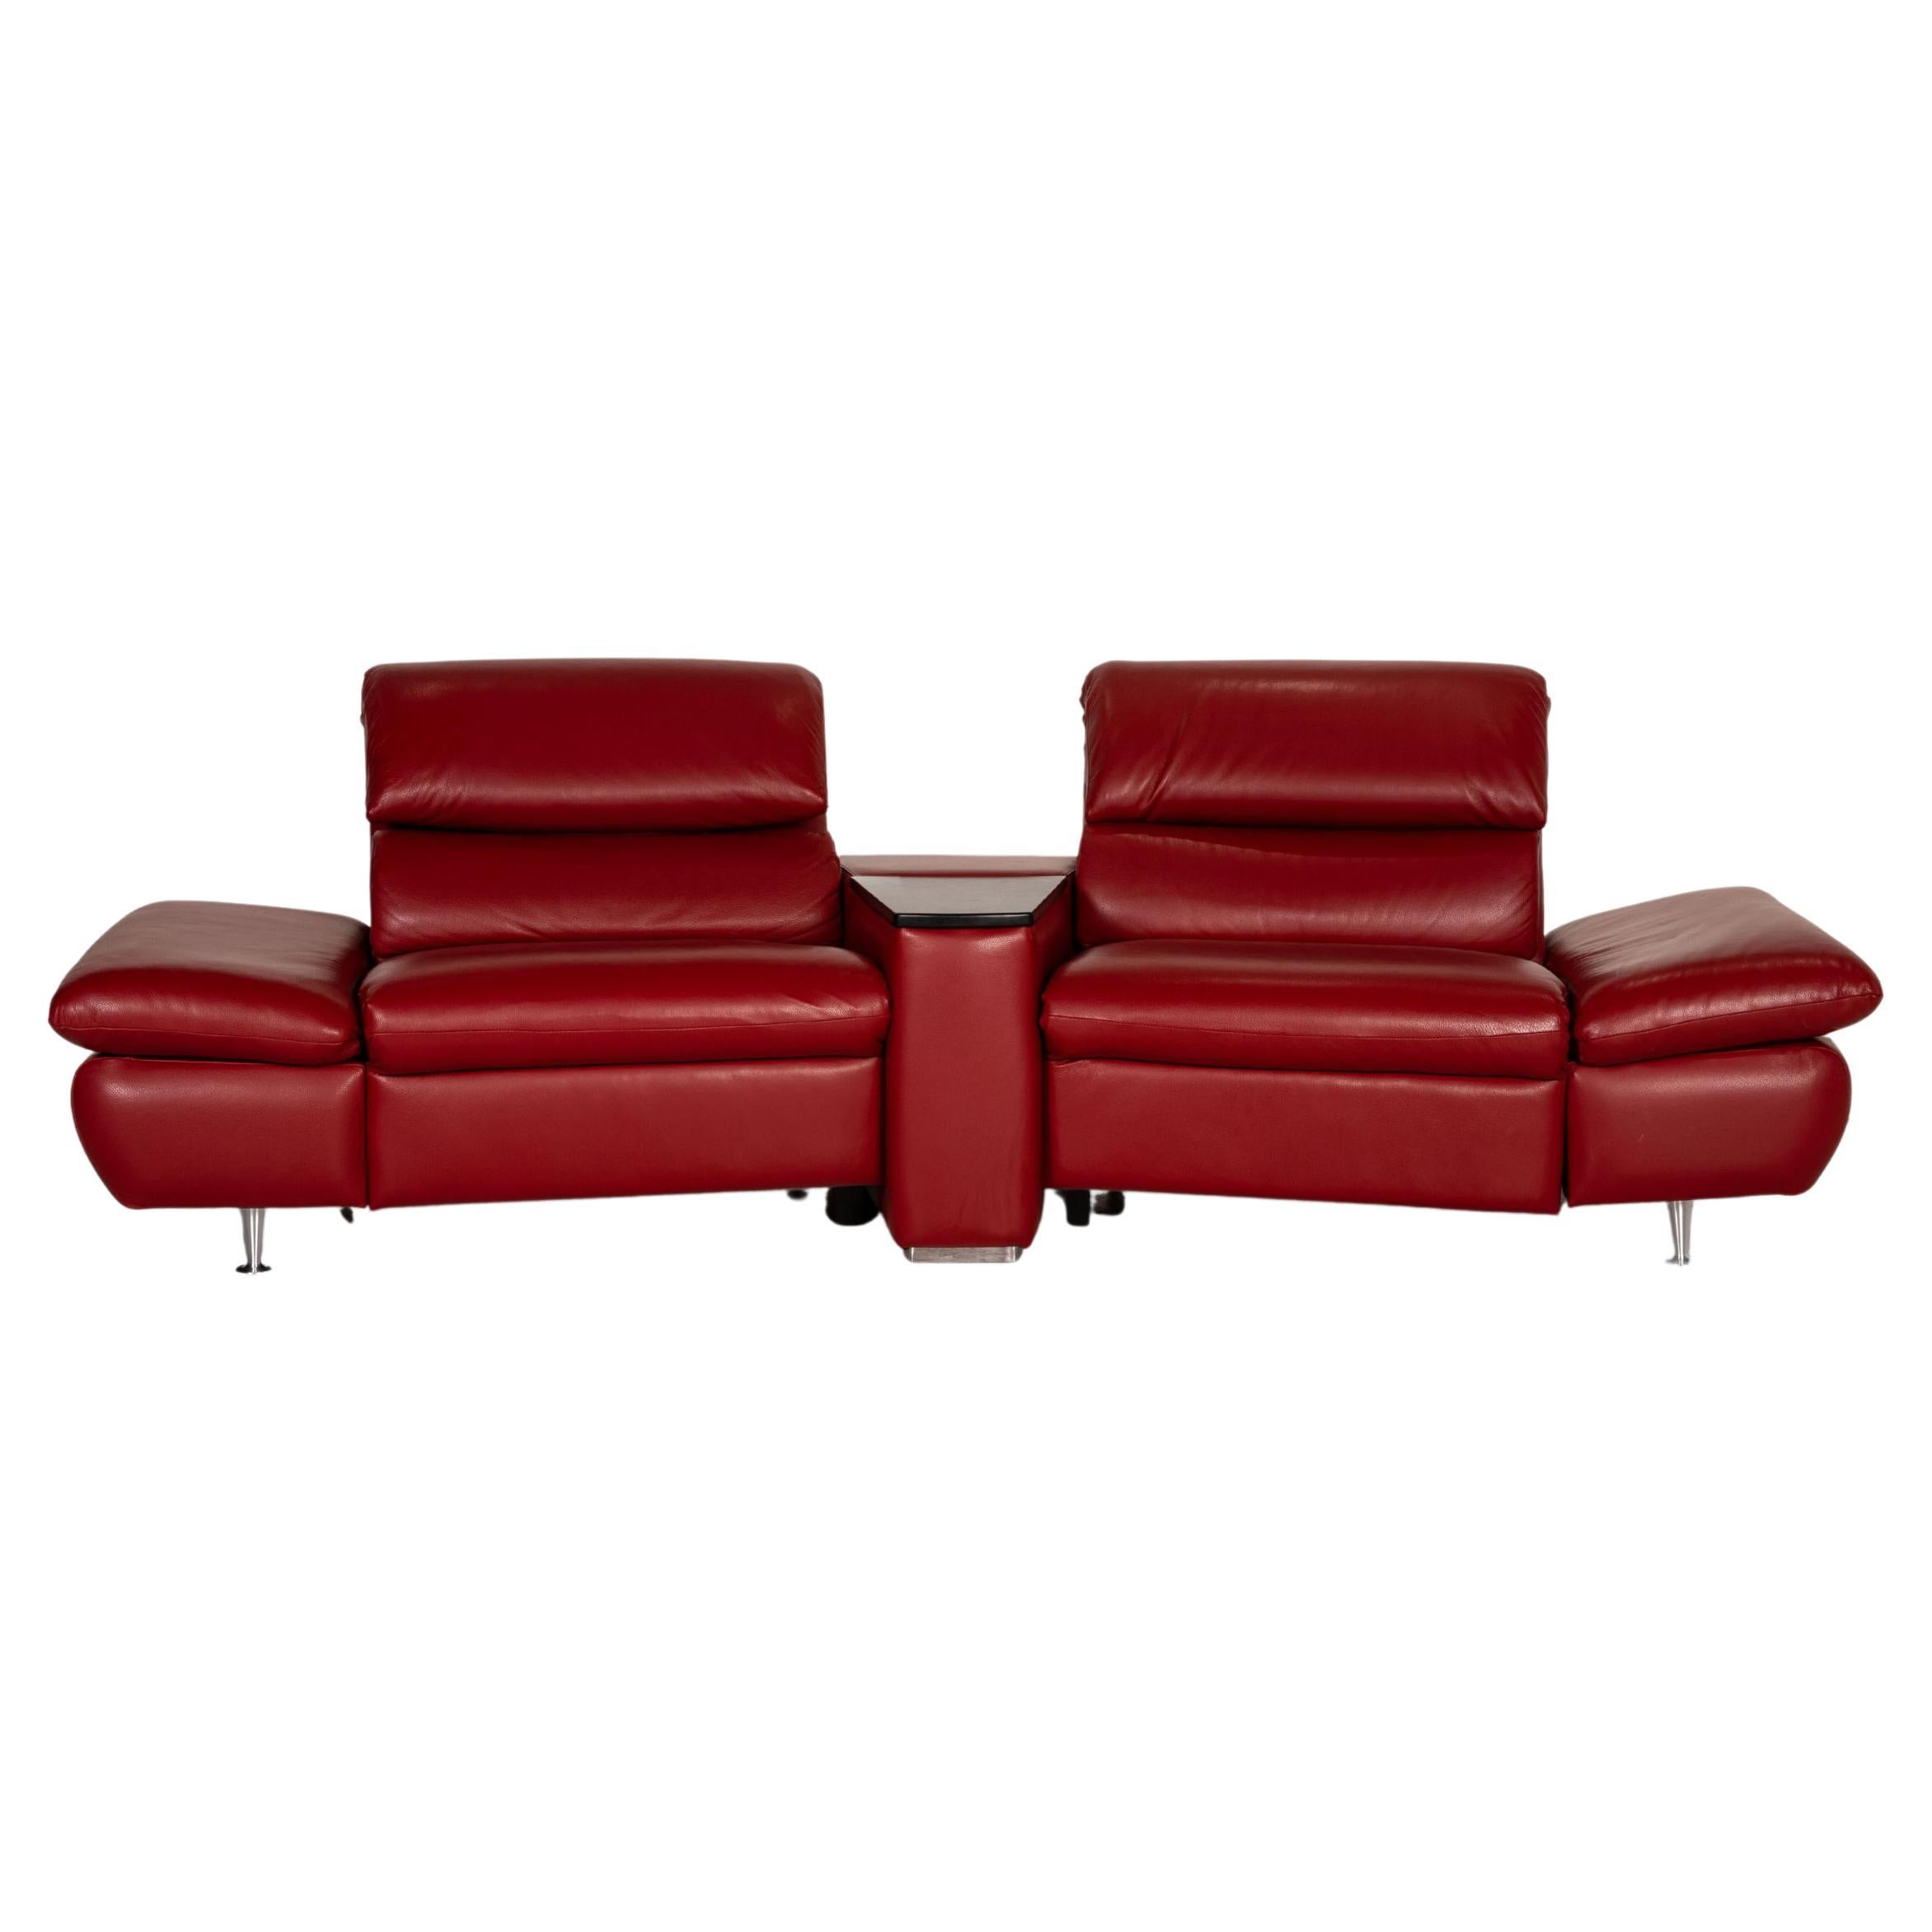 Hjort Knudsen Danish Design Barbardos Leather Sofa Red Two-Seater Couch For Sale